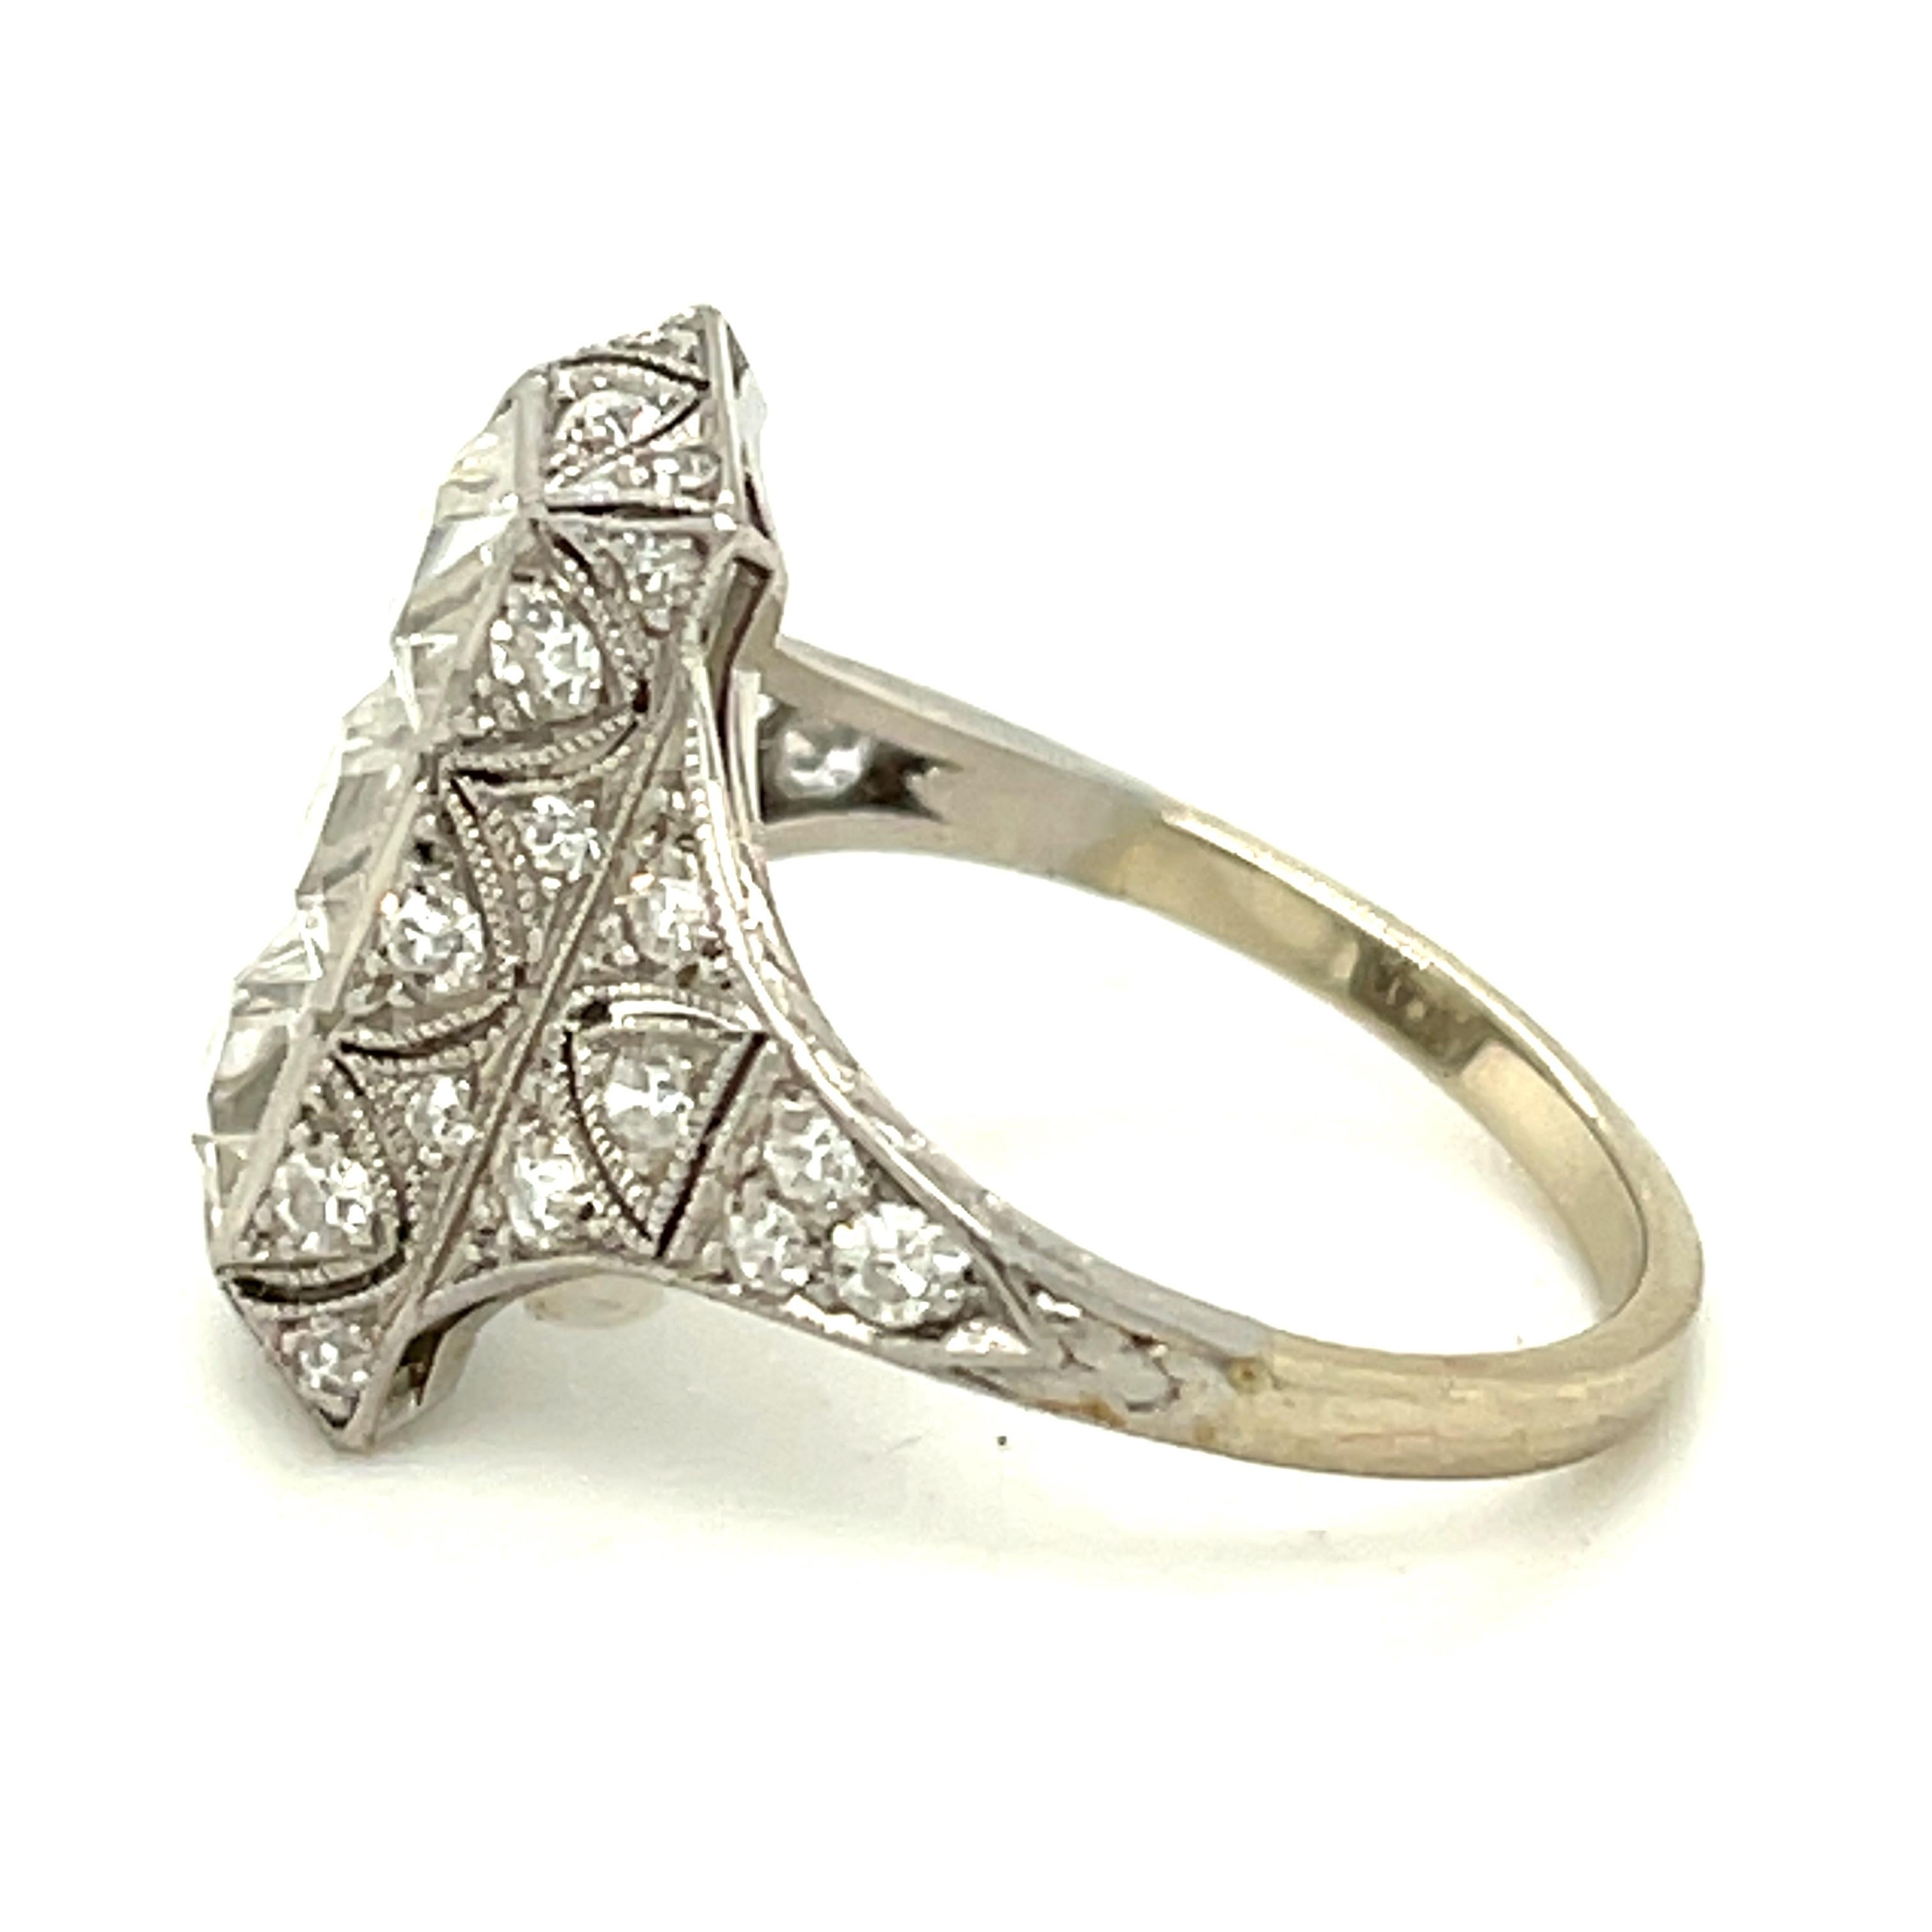 Antique Art Deco filigree platinum diamond ring centering upon three French Cut diamonds, circa 1920. The three white and clean diamonds weigh approximately 0.75 carats each. The mounting has  28 single cut diamonds weighing an additional 0.70